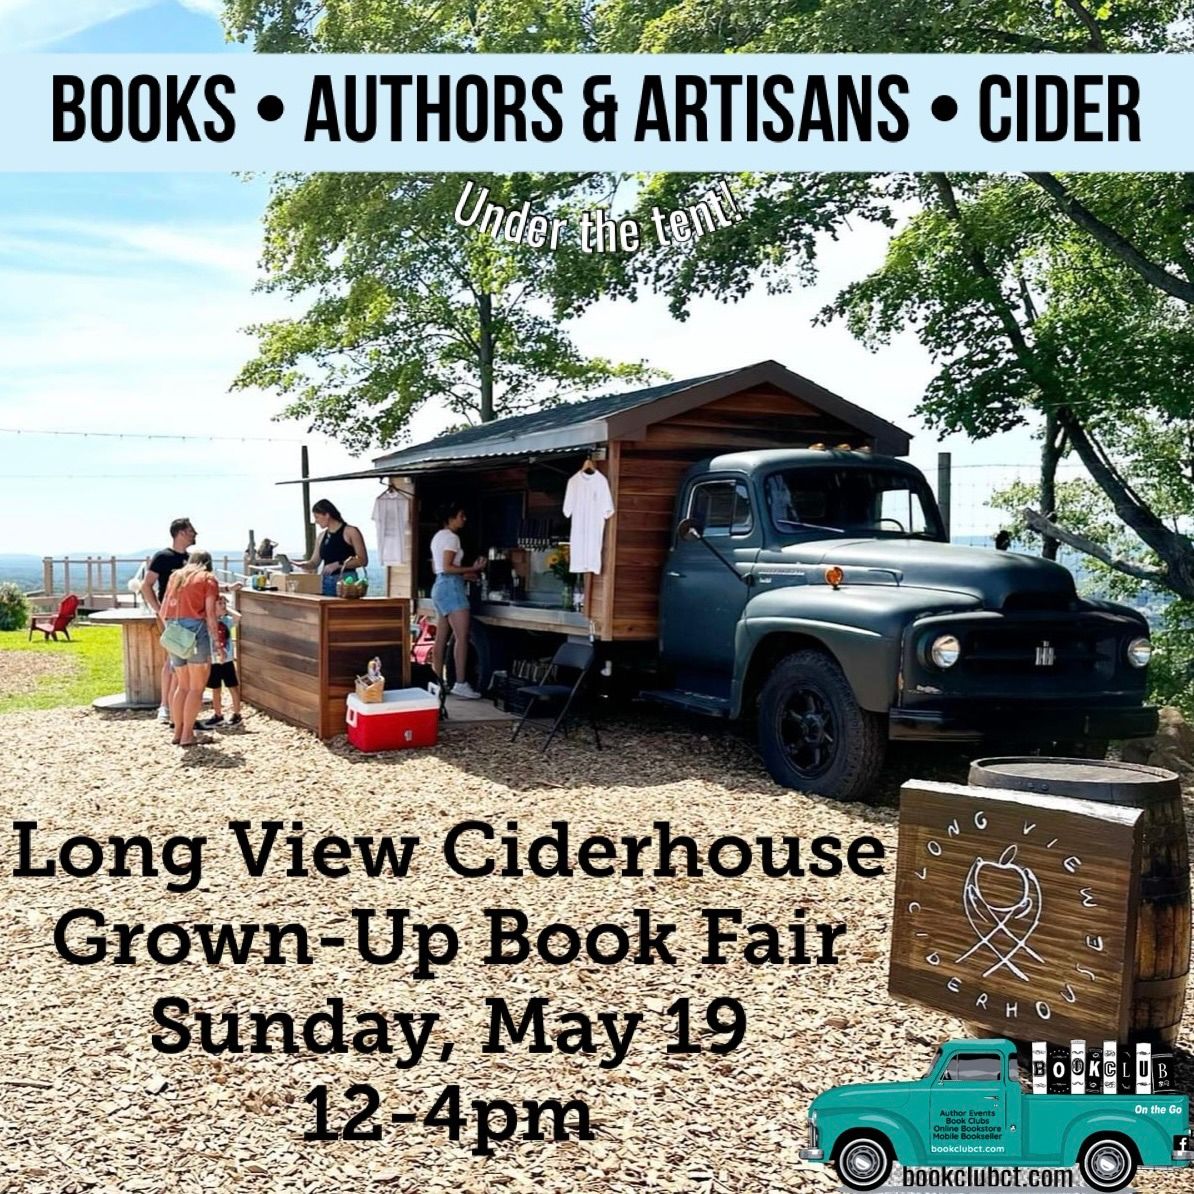 Grown-up Book Fair at Long View Ciderhouse